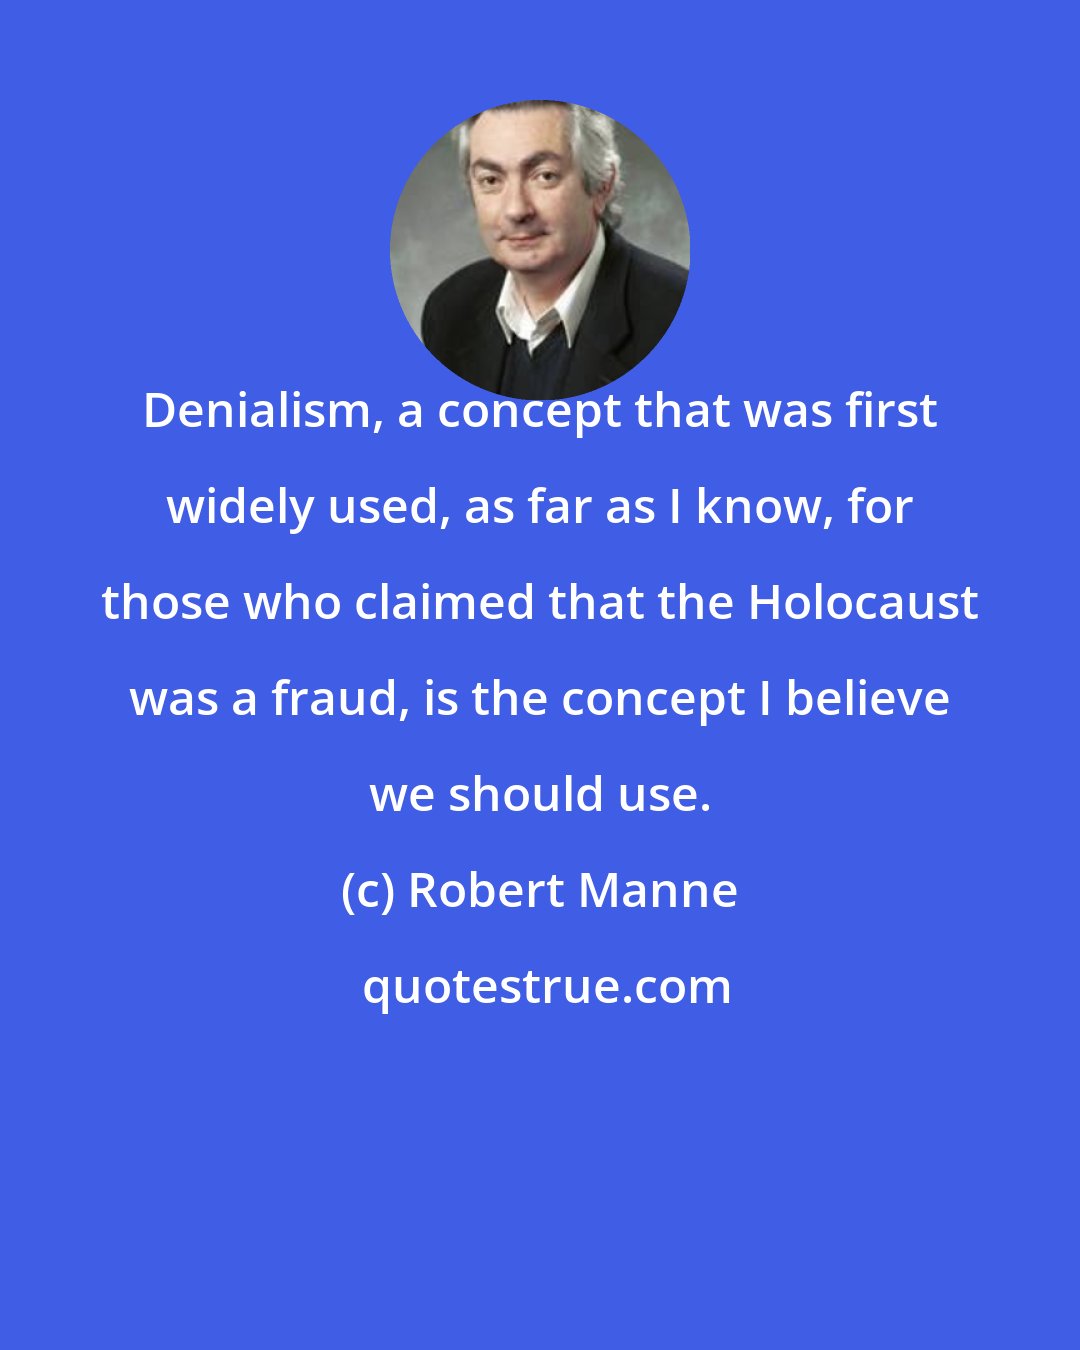 Robert Manne: Denialism, a concept that was first widely used, as far as I know, for those who claimed that the Holocaust was a fraud, is the concept I believe we should use.